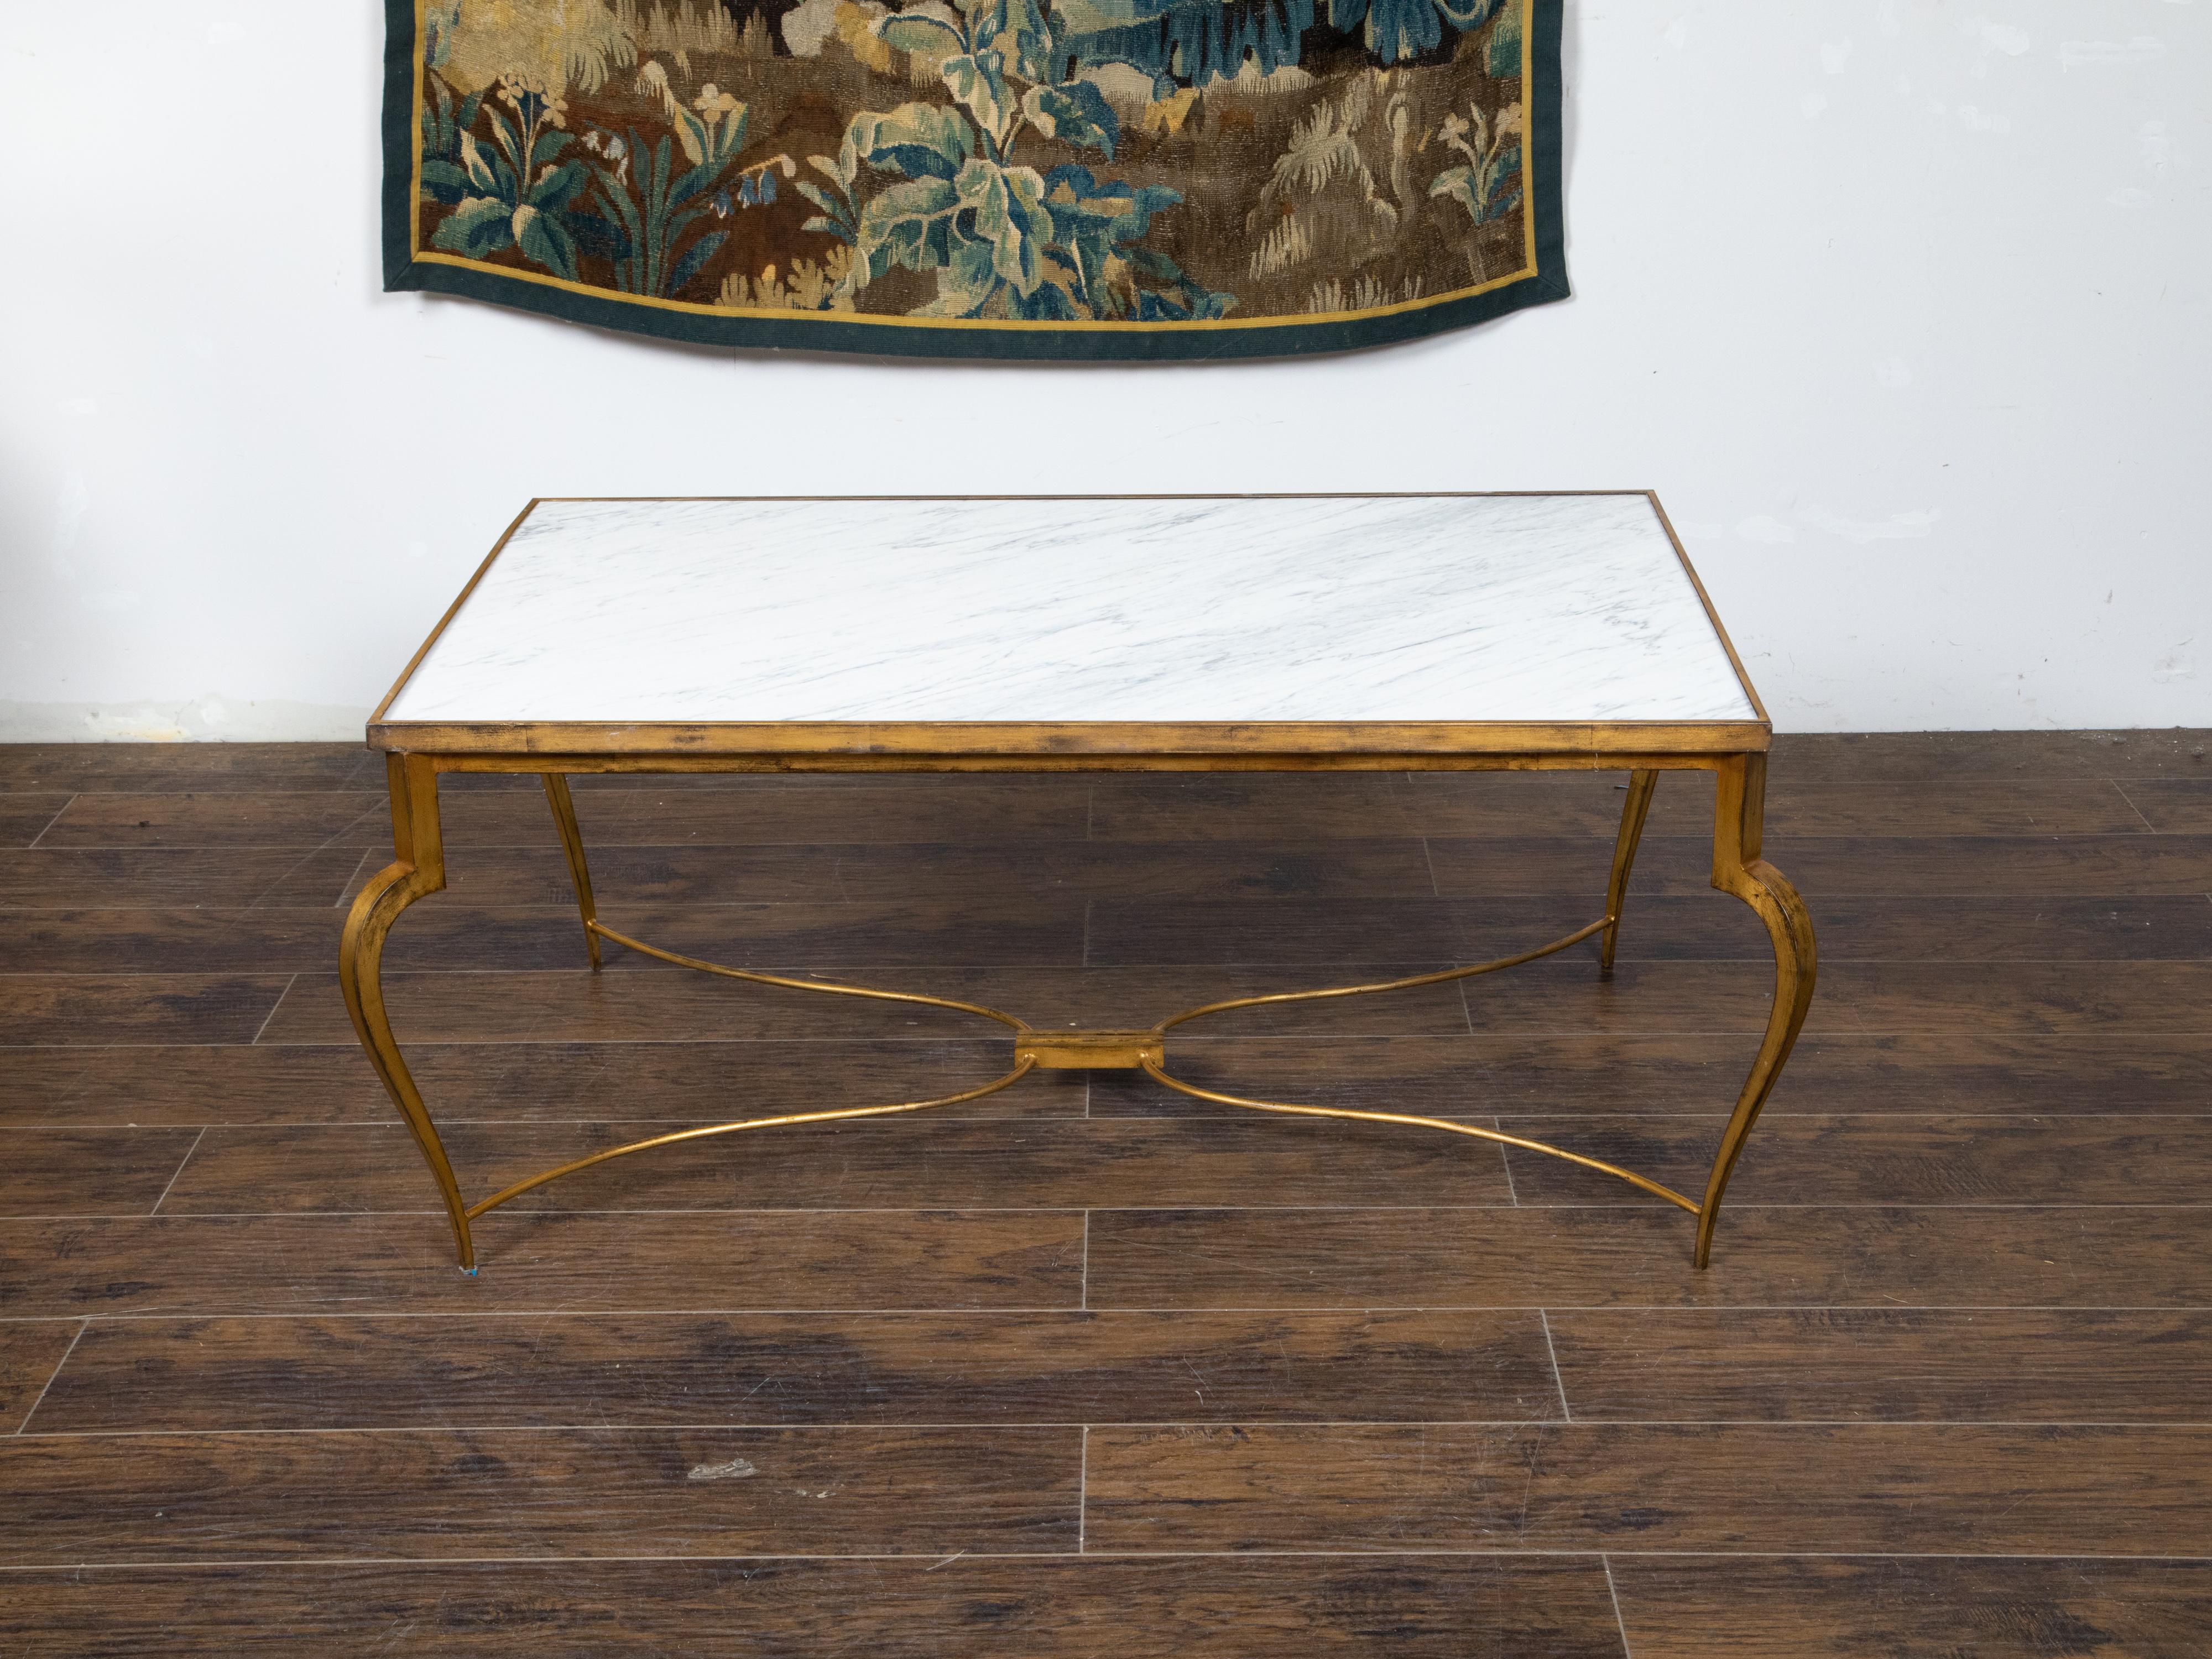 A French vintage gilt iron coffee table from the Mid-20th Century with white veined marble top, cabriole legs and curving X-Form stretcher. Created in France during the midcentury period, this coffee table features a rectangular white veined marble